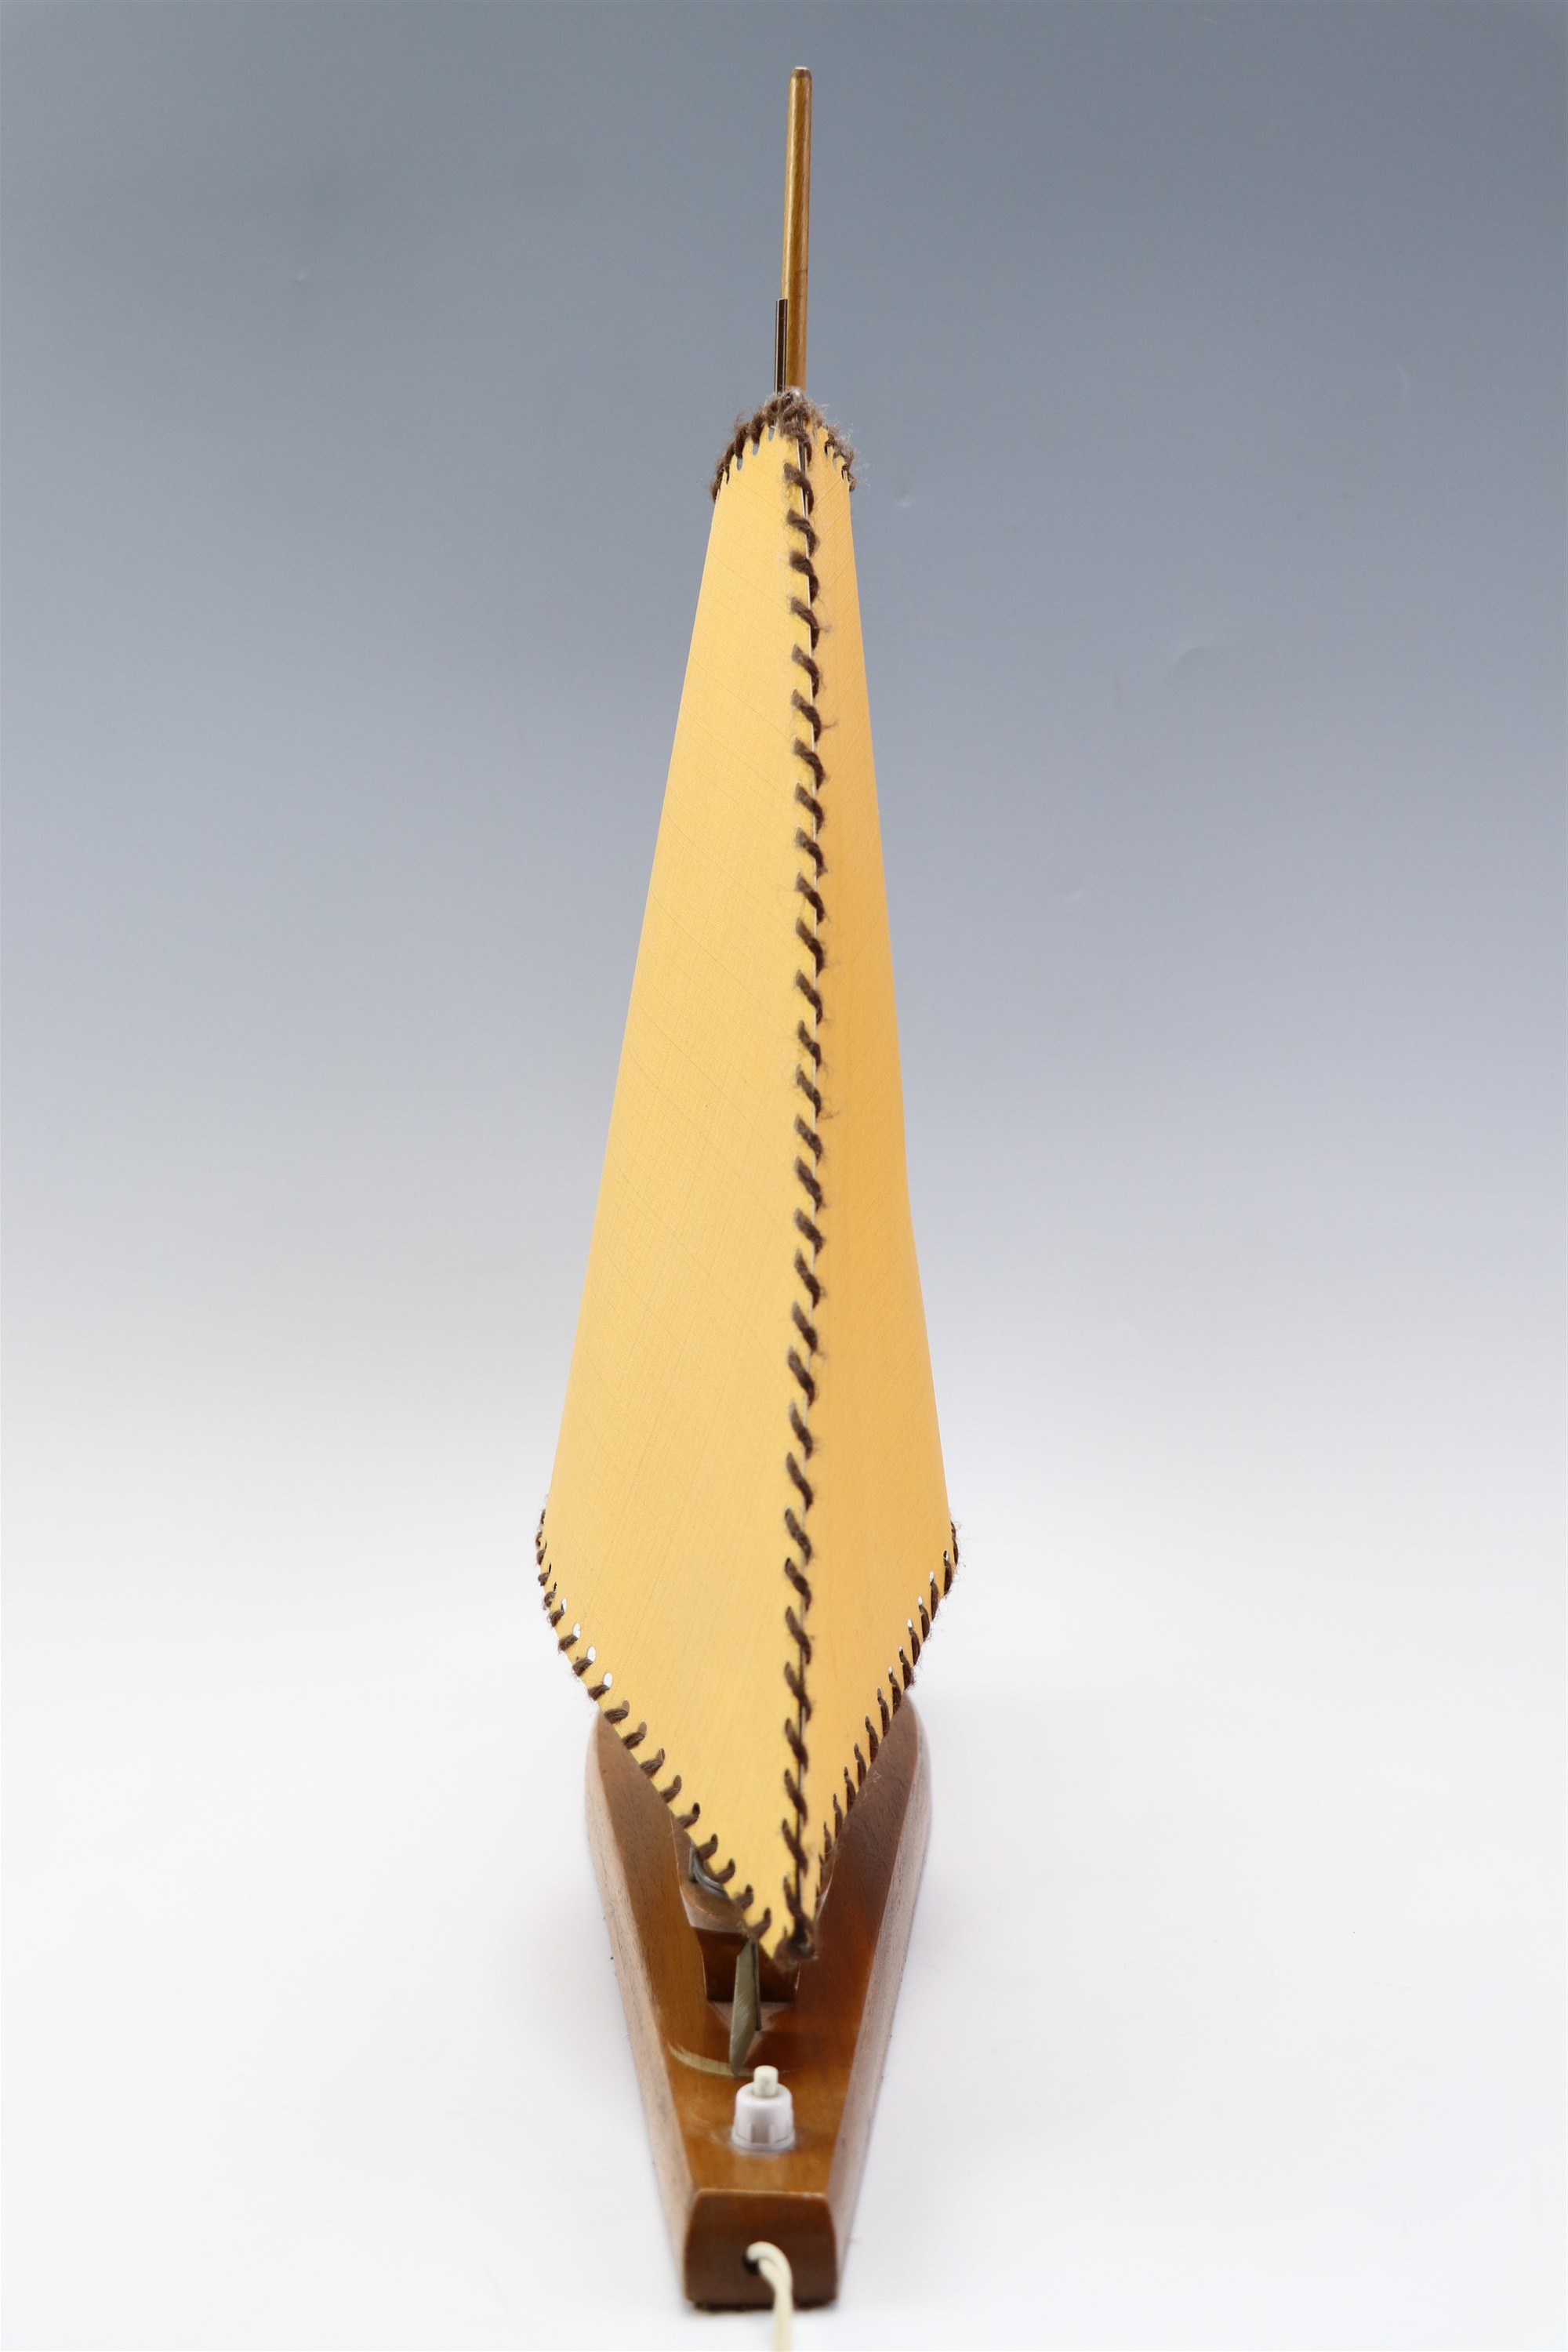 A vintage wooden table lamp in the form of a sailing boat / yacht, 49 cm - Image 5 of 6